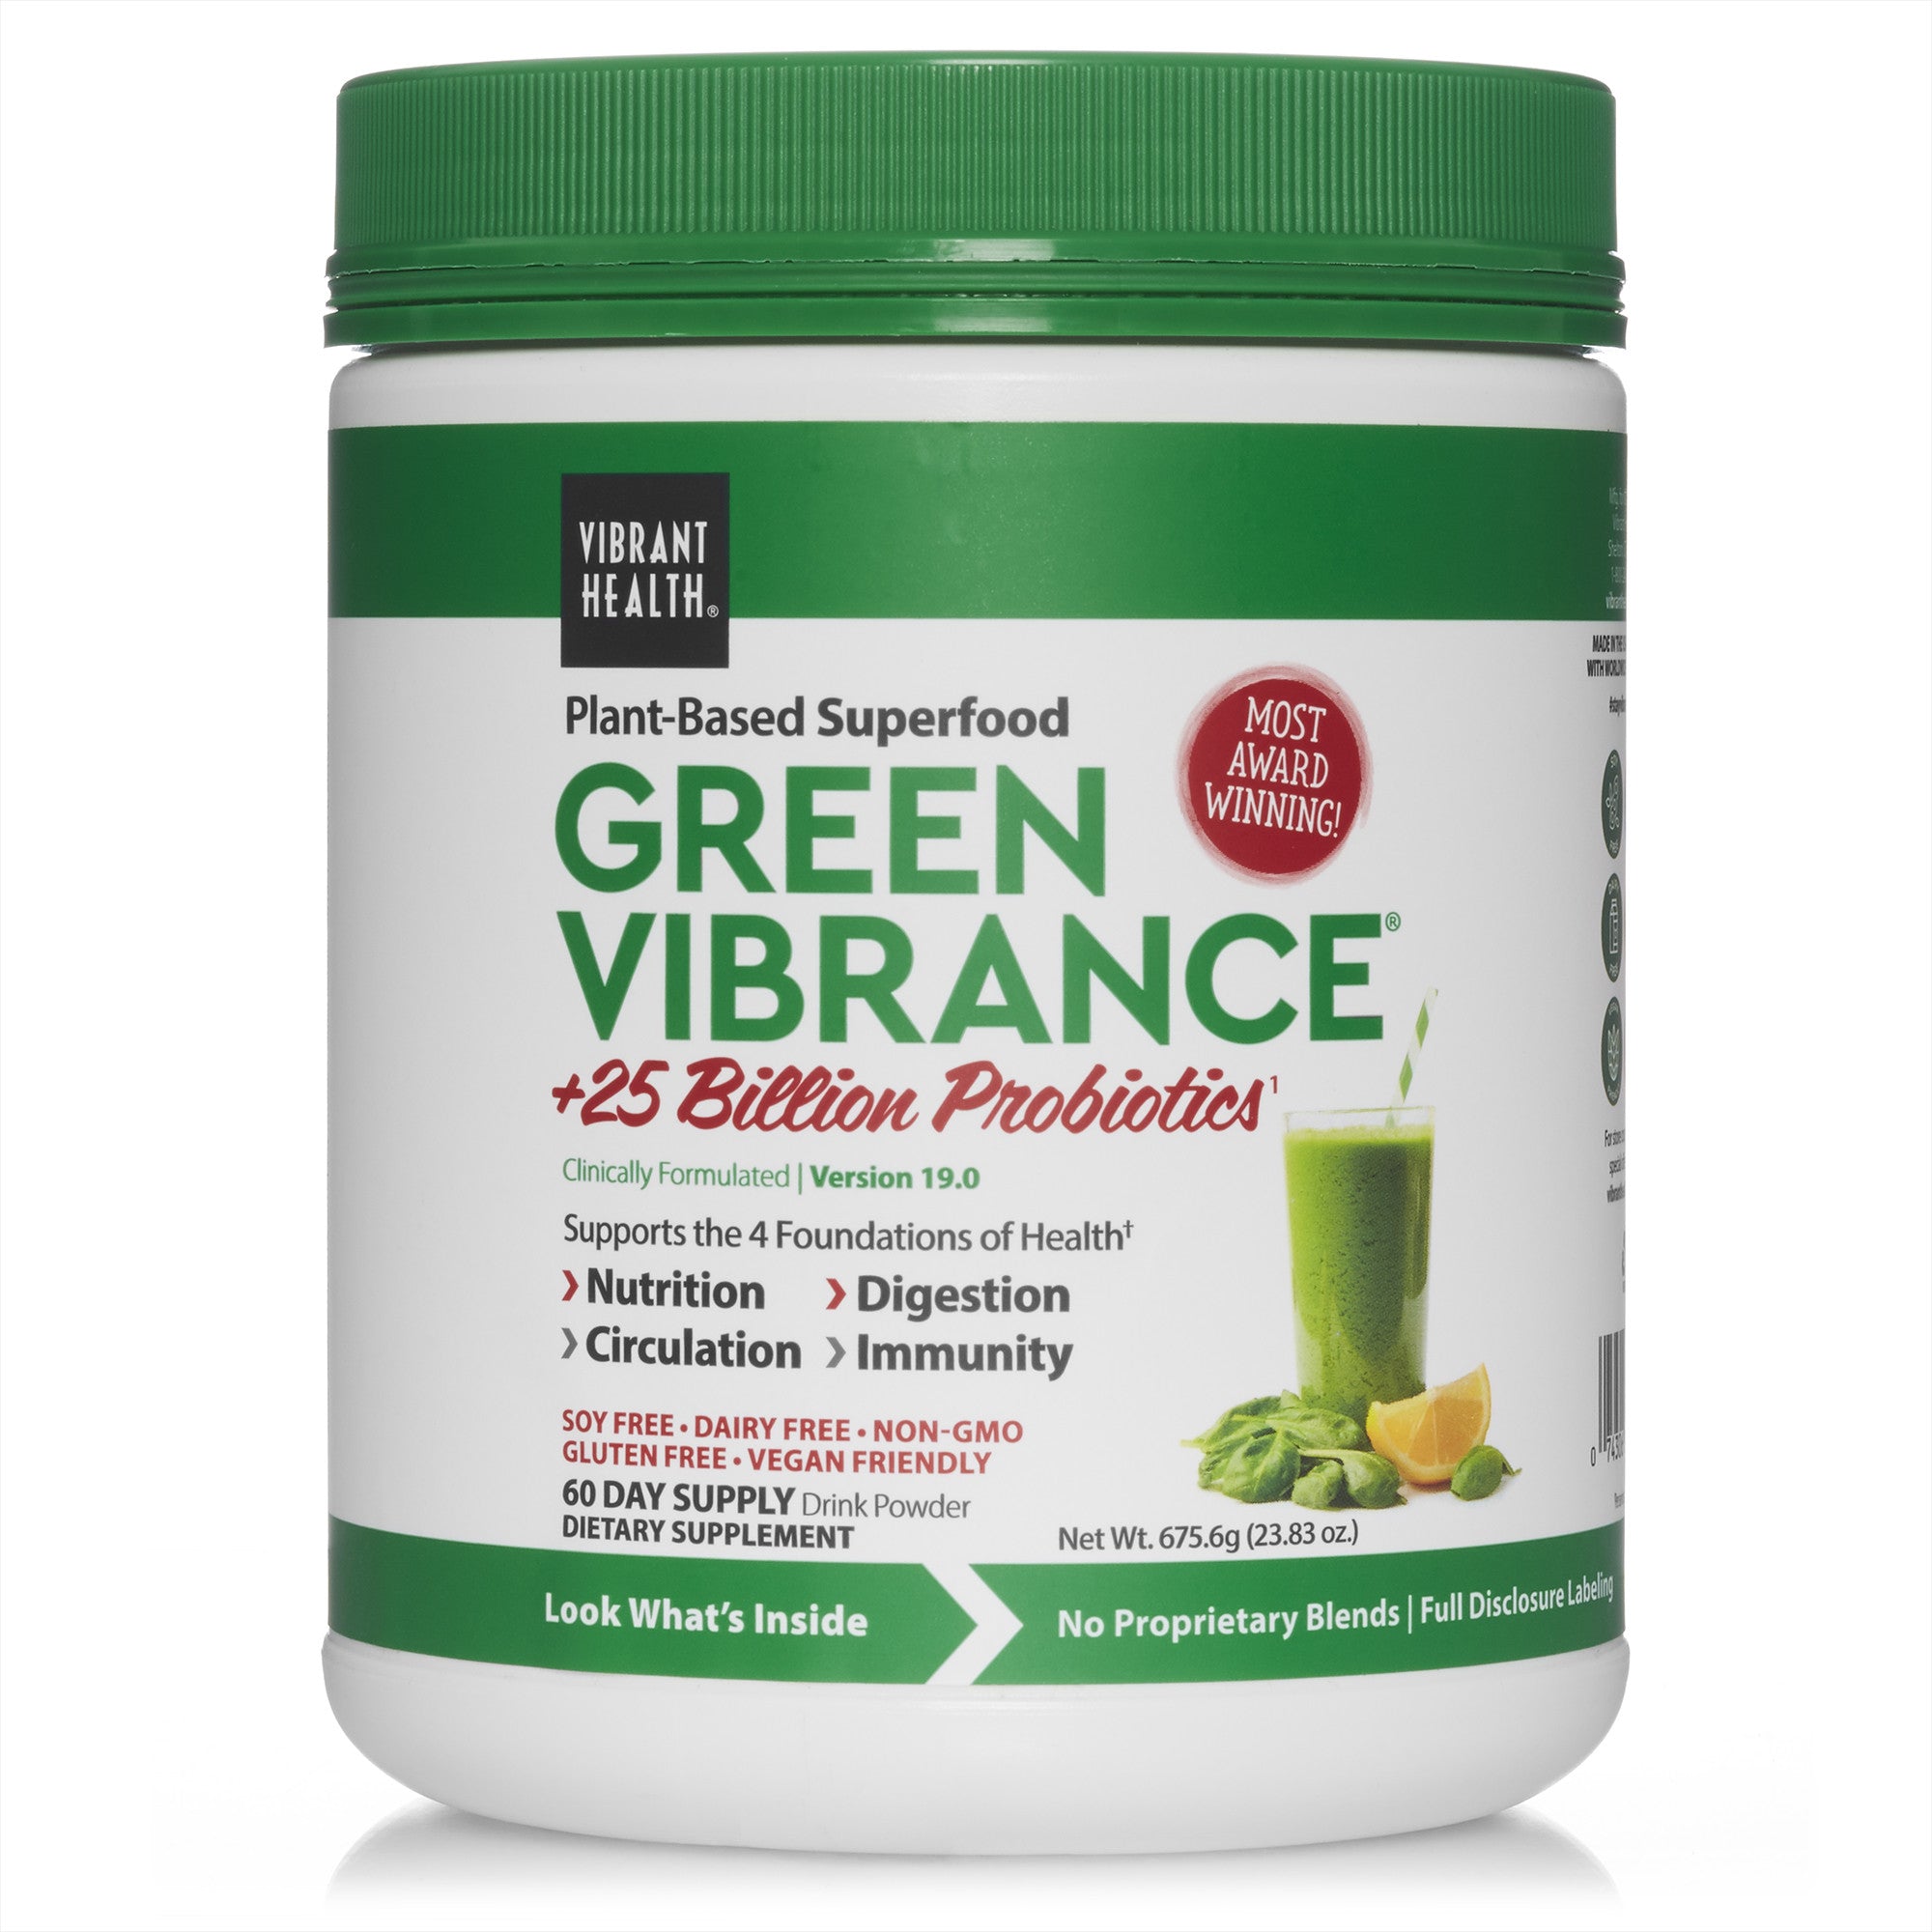 Vibrant Health Green Vibrance Plant Based Superfood 60 Days Drink Powder, 23.83 Ounce